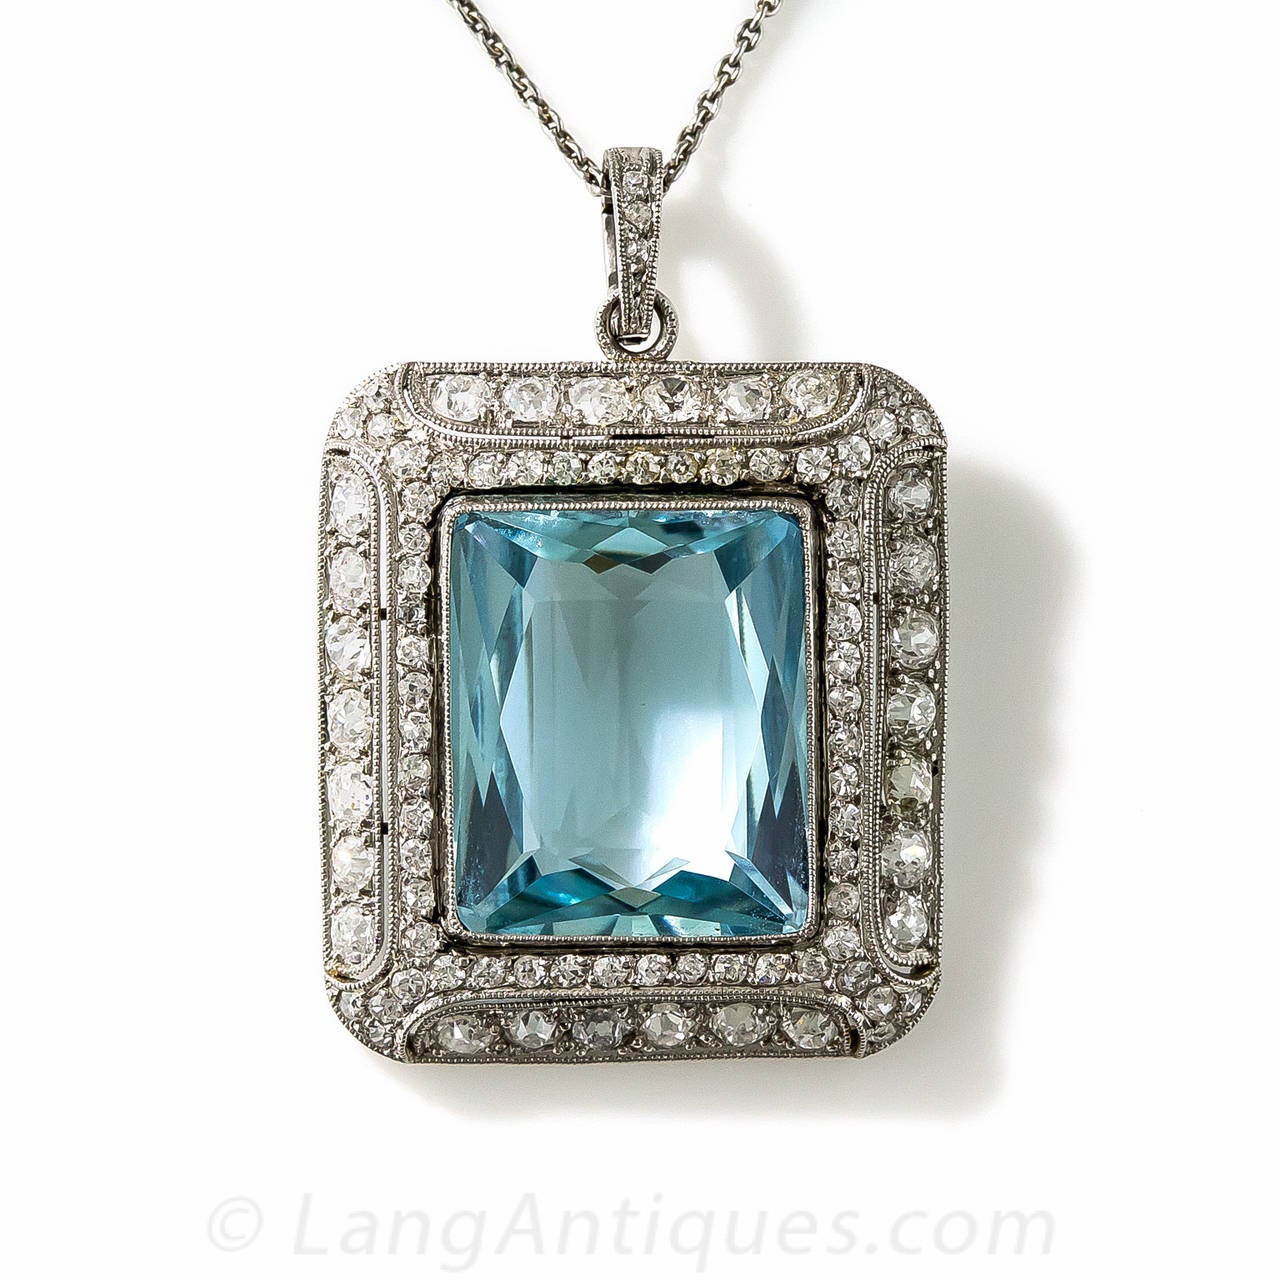 This thoroughly enchanting original Art Deco jewel, circa 1920s, highlights a placid, pastel blue Aquamarine, weighing 10 carats. The rectangular gemstone is artfully fashioned with striking scissor-cut faceting and fills an stunning, decoratively